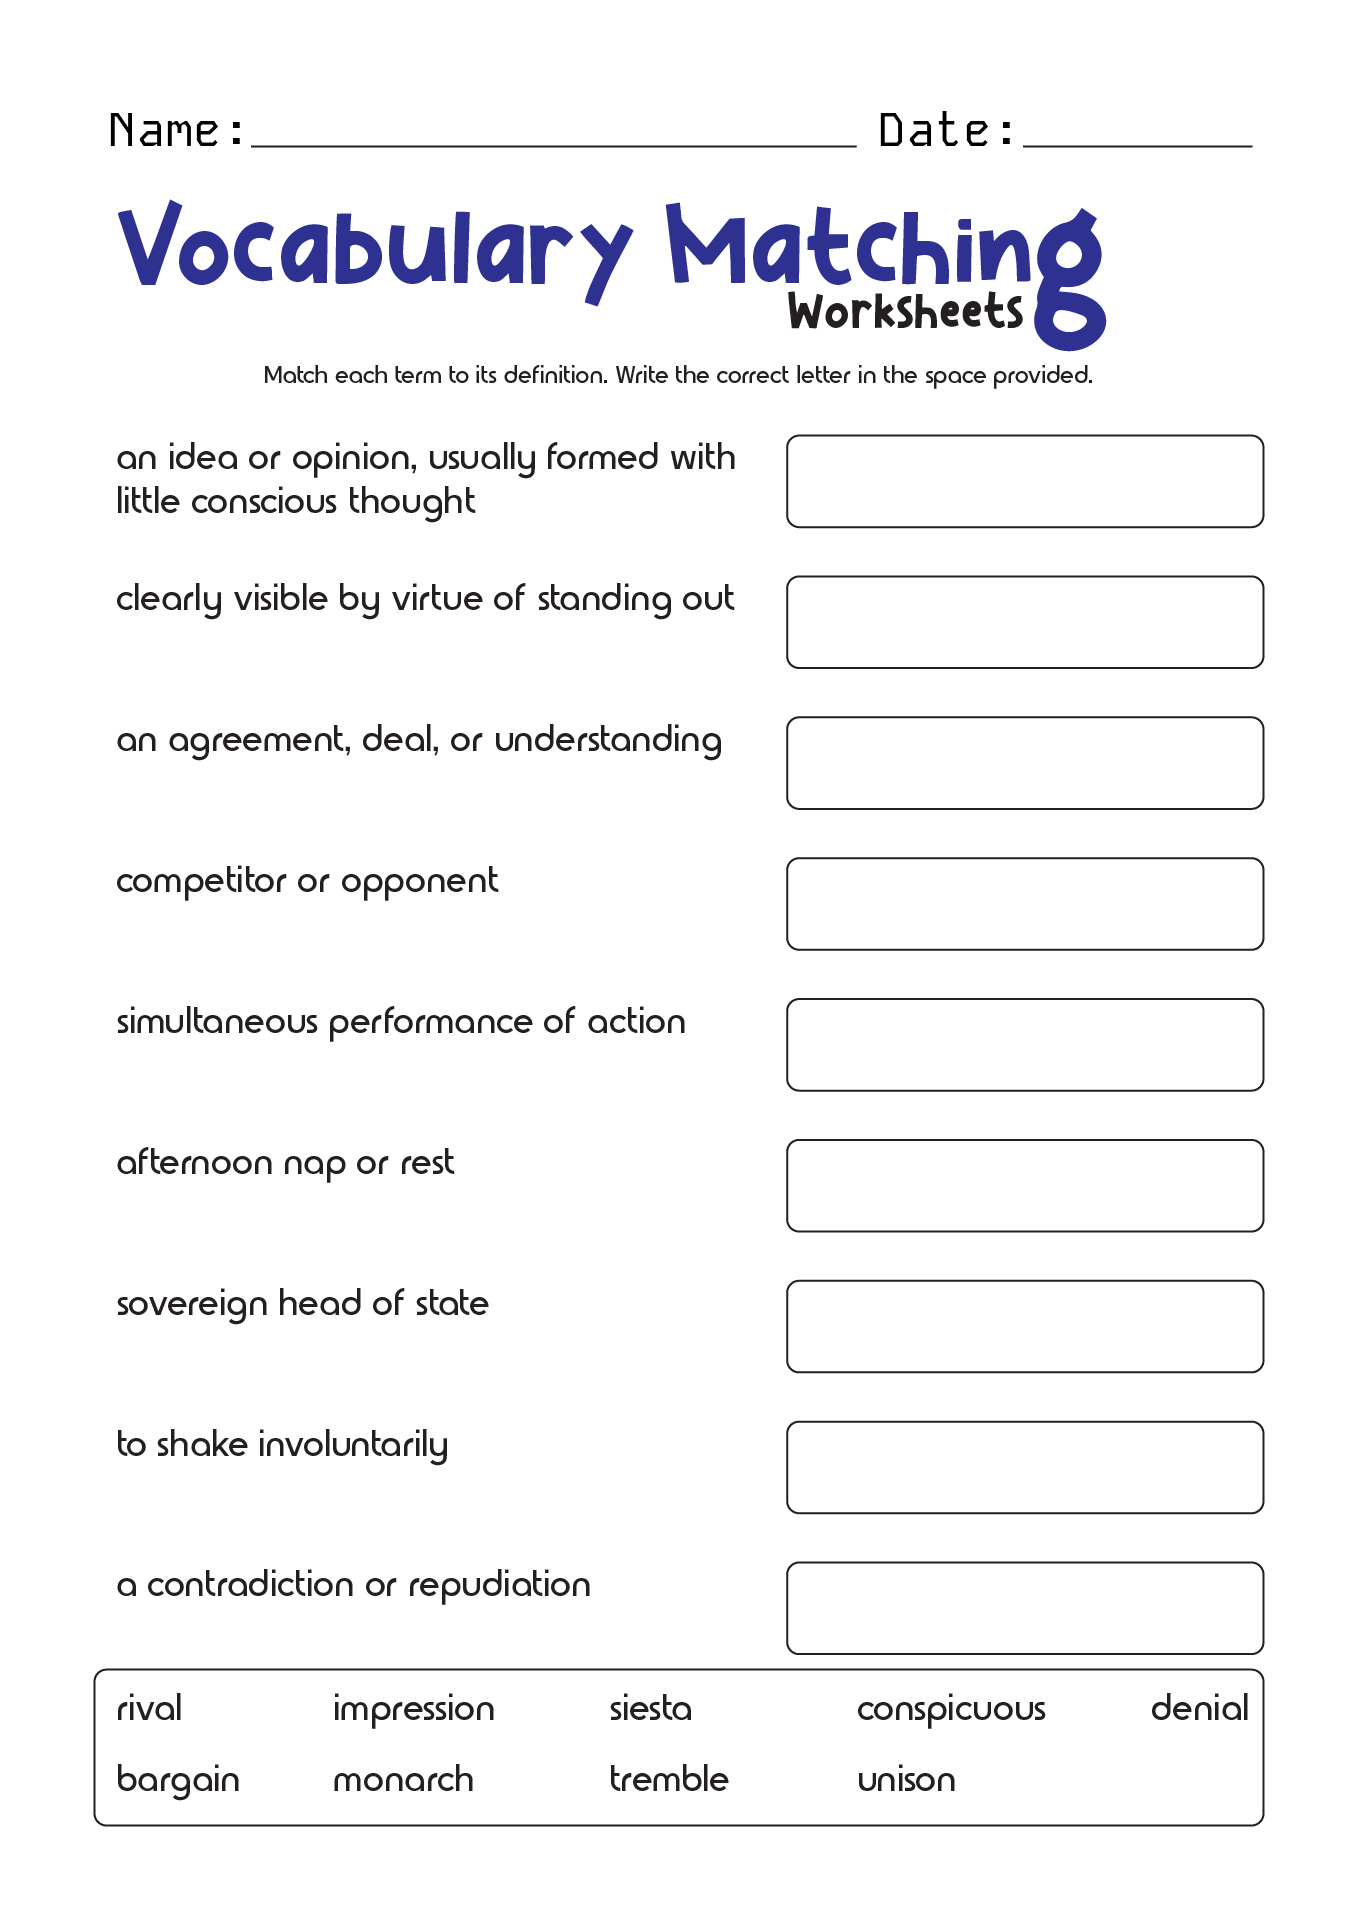 14 Matching Definitions To Words Worksheets Free PDF At Worksheeto